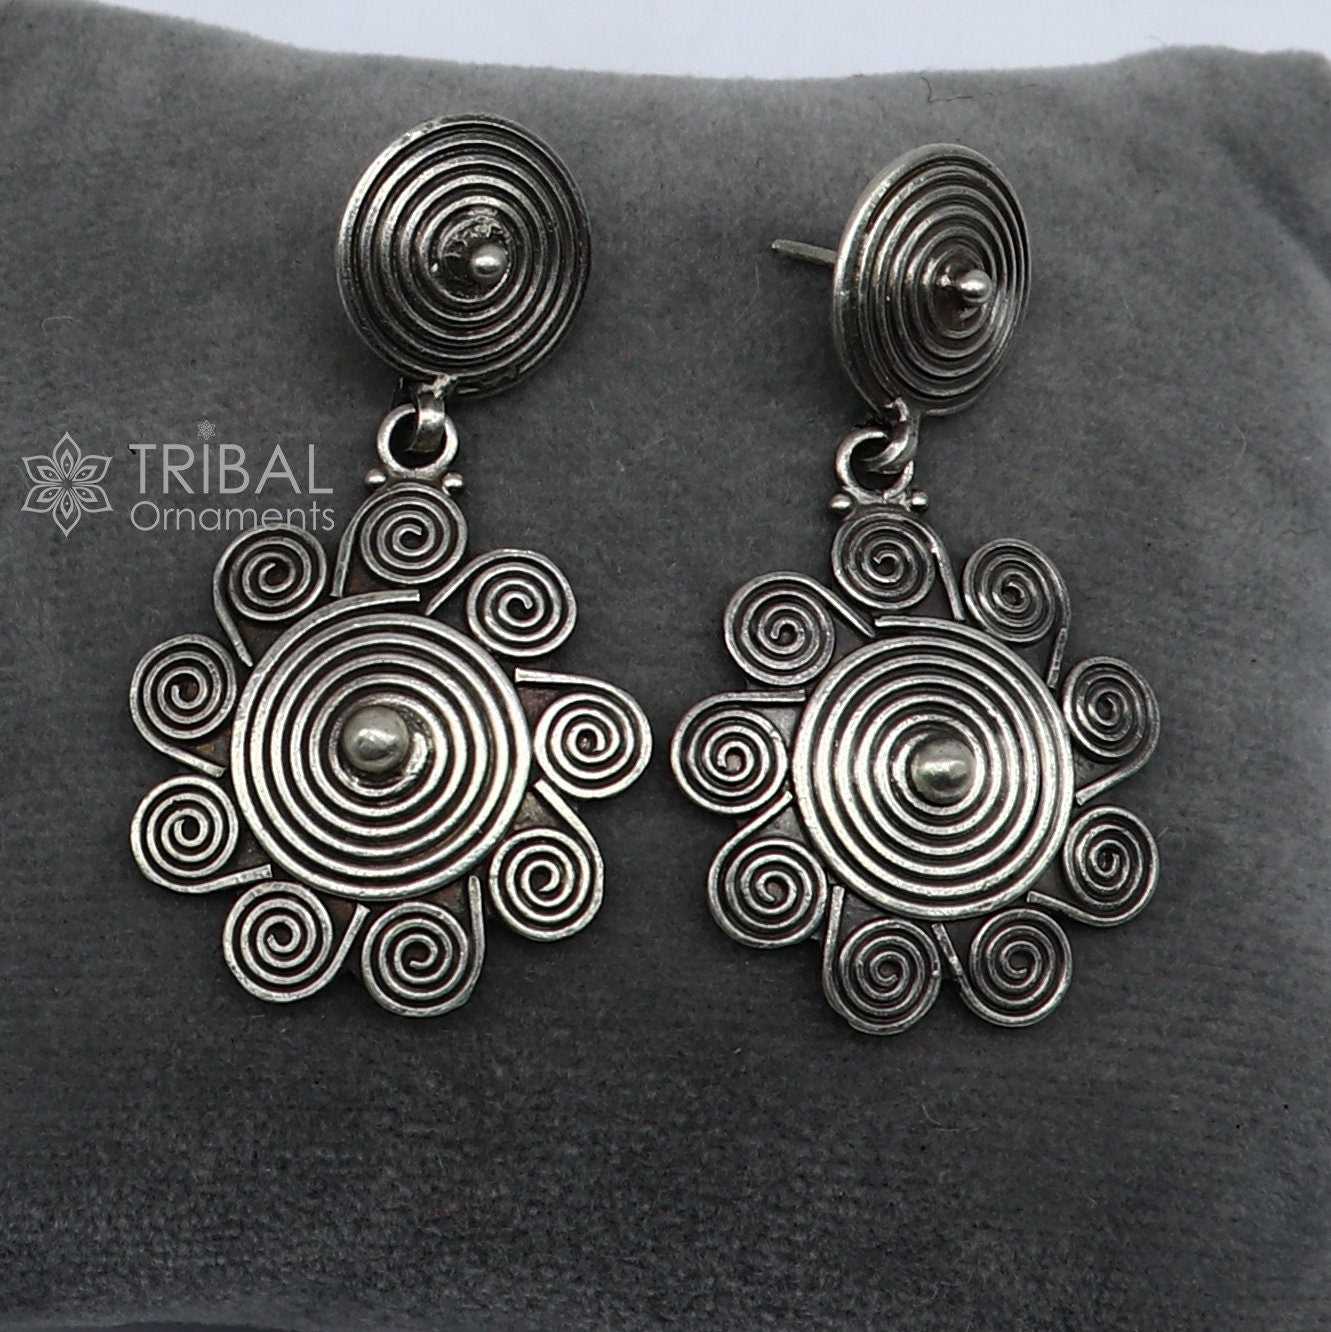 925 sterling silver handcrafted earring, stud earring, amazing Stylish design functional party wear gifting earring wedding jewelry s1230 - TRIBAL ORNAMENTS